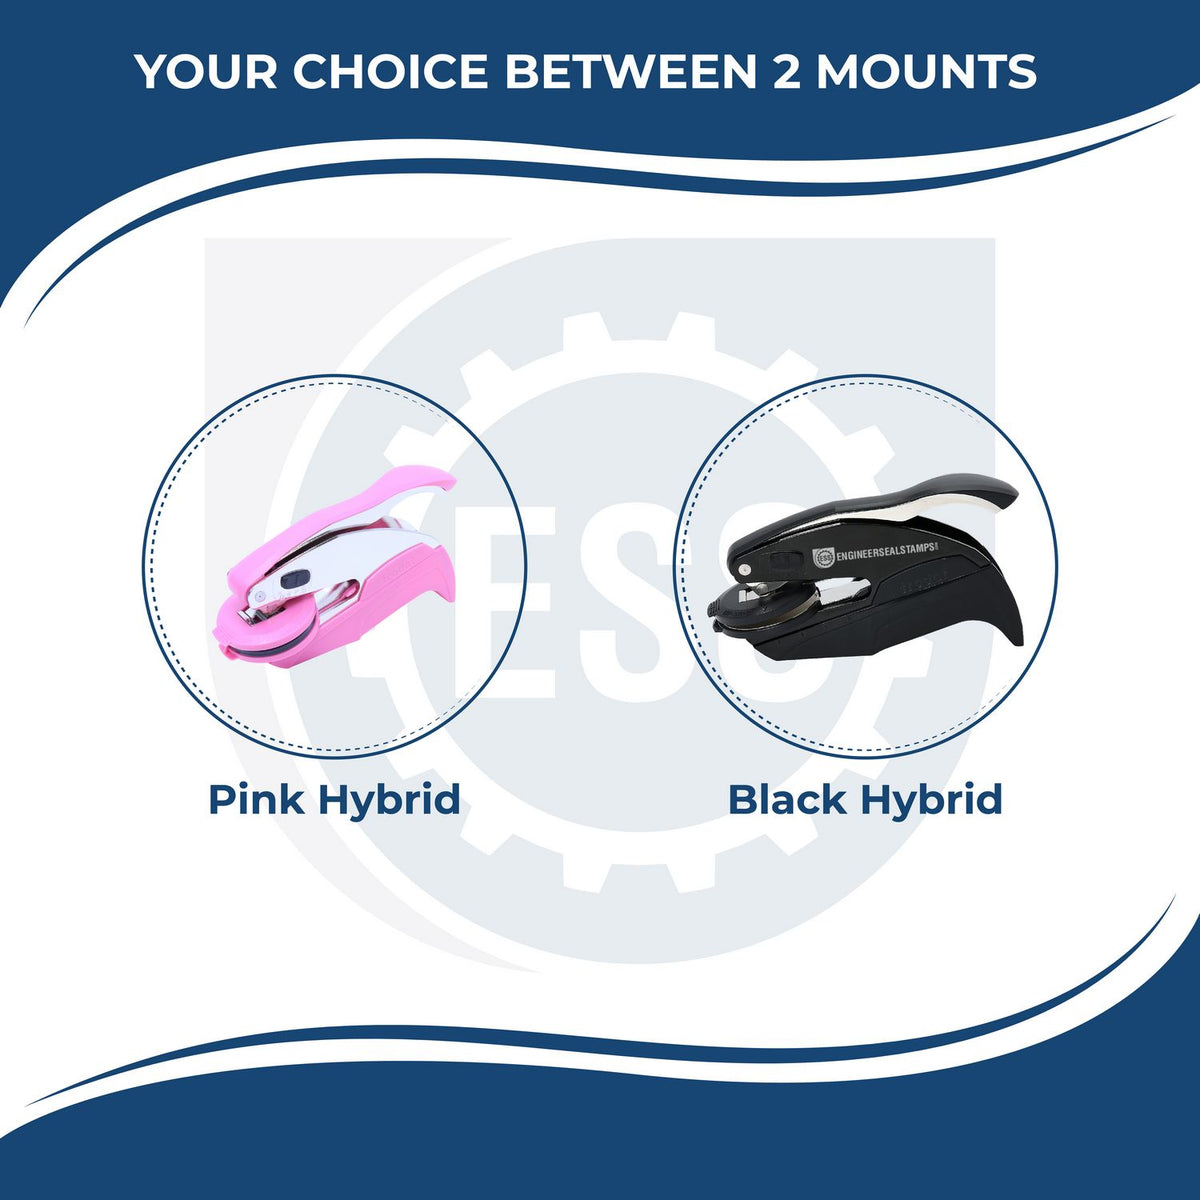 A diagram showing the two-color handle options for the hybrid seal illustrating black or pink